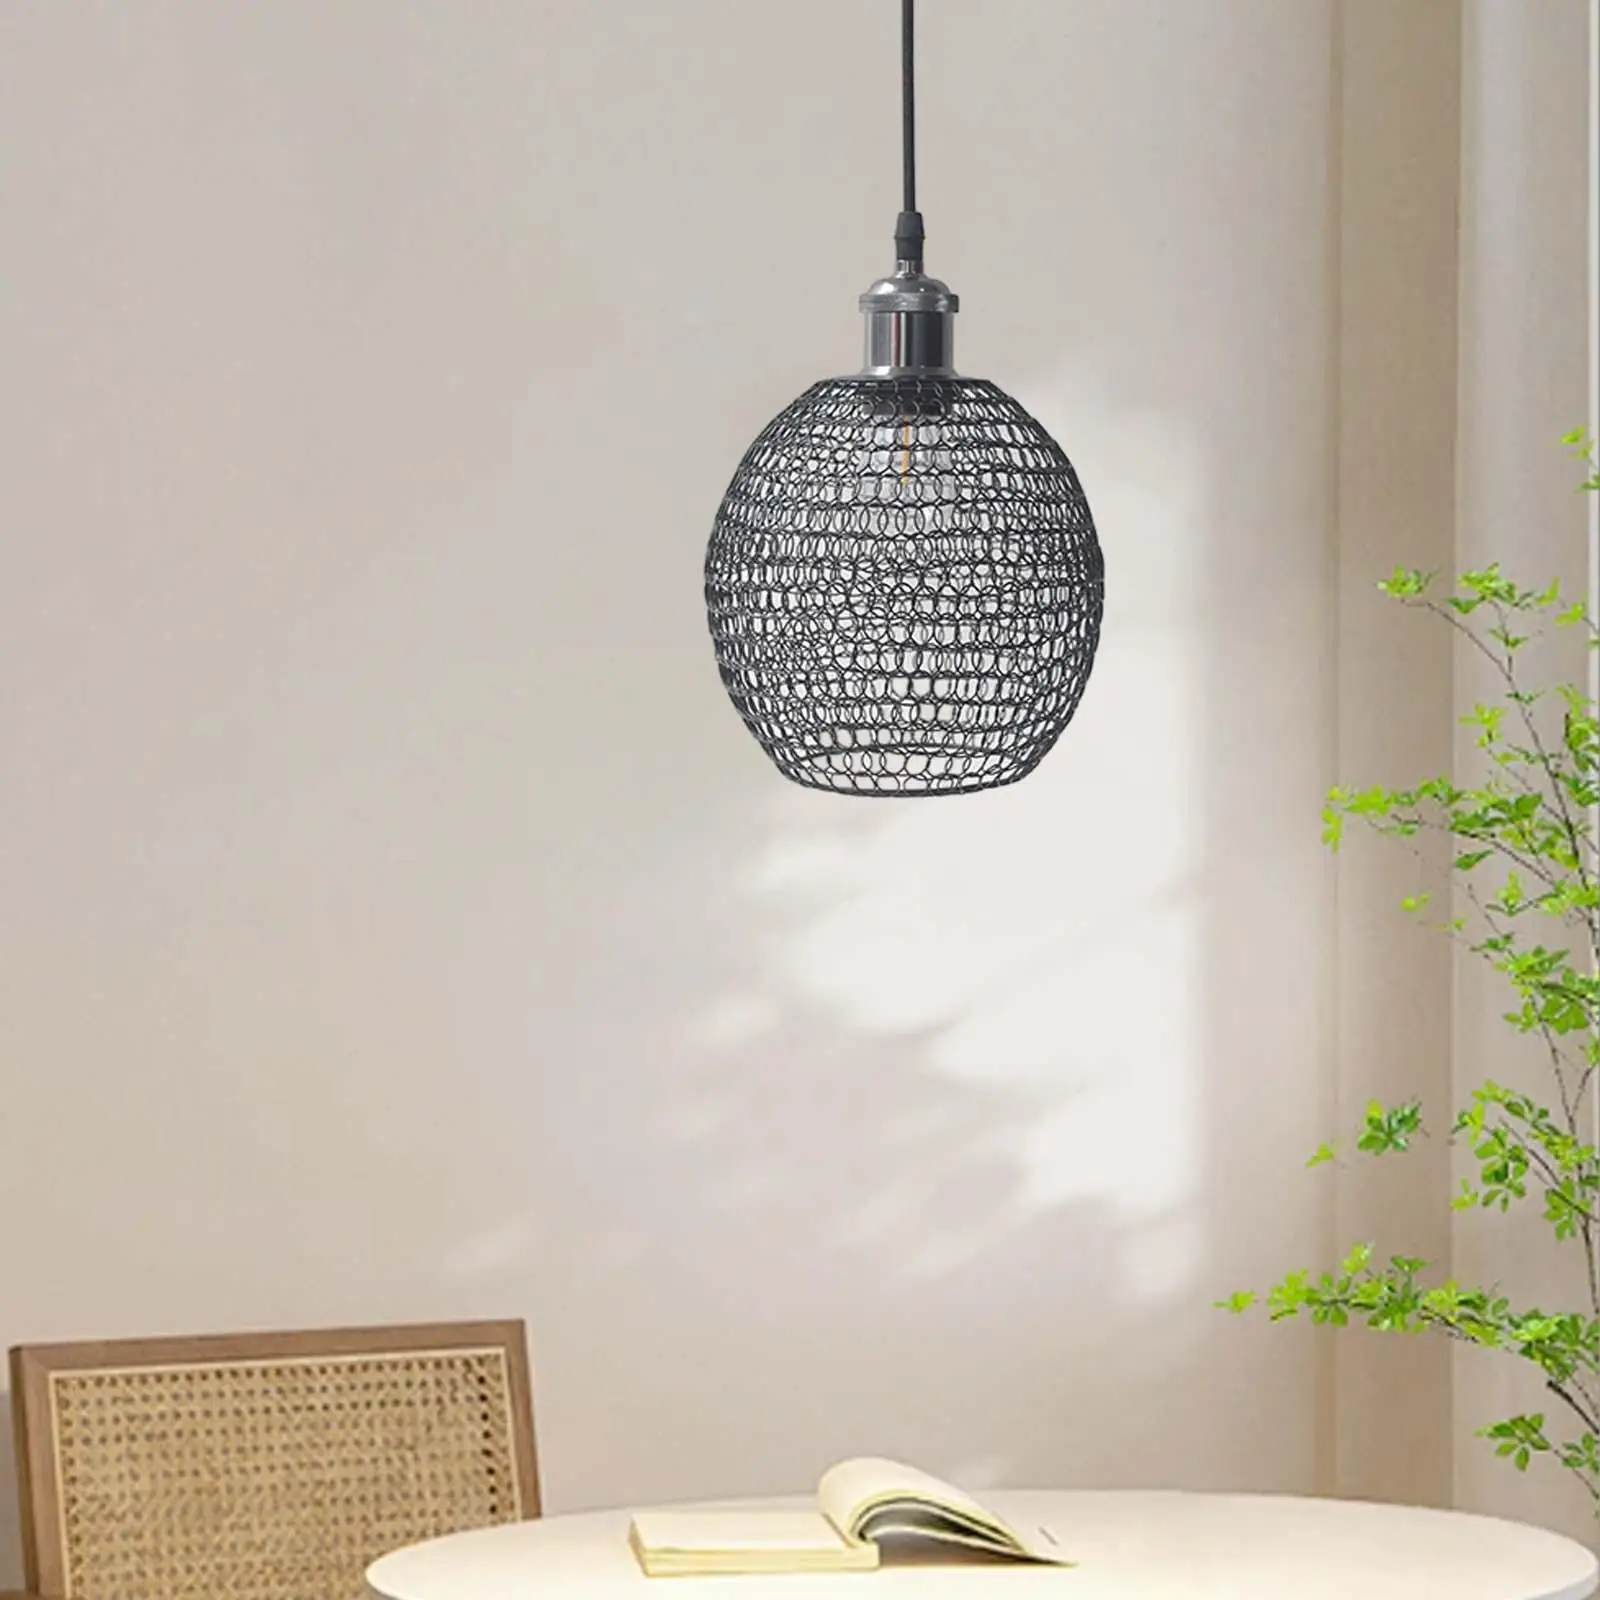 Mesh Lamp Shade Decoration Lighting Fixtures Lamp Guard Pendant Light Cage for Hotel Kitchen Bedroom Coffee Shop Dining Room